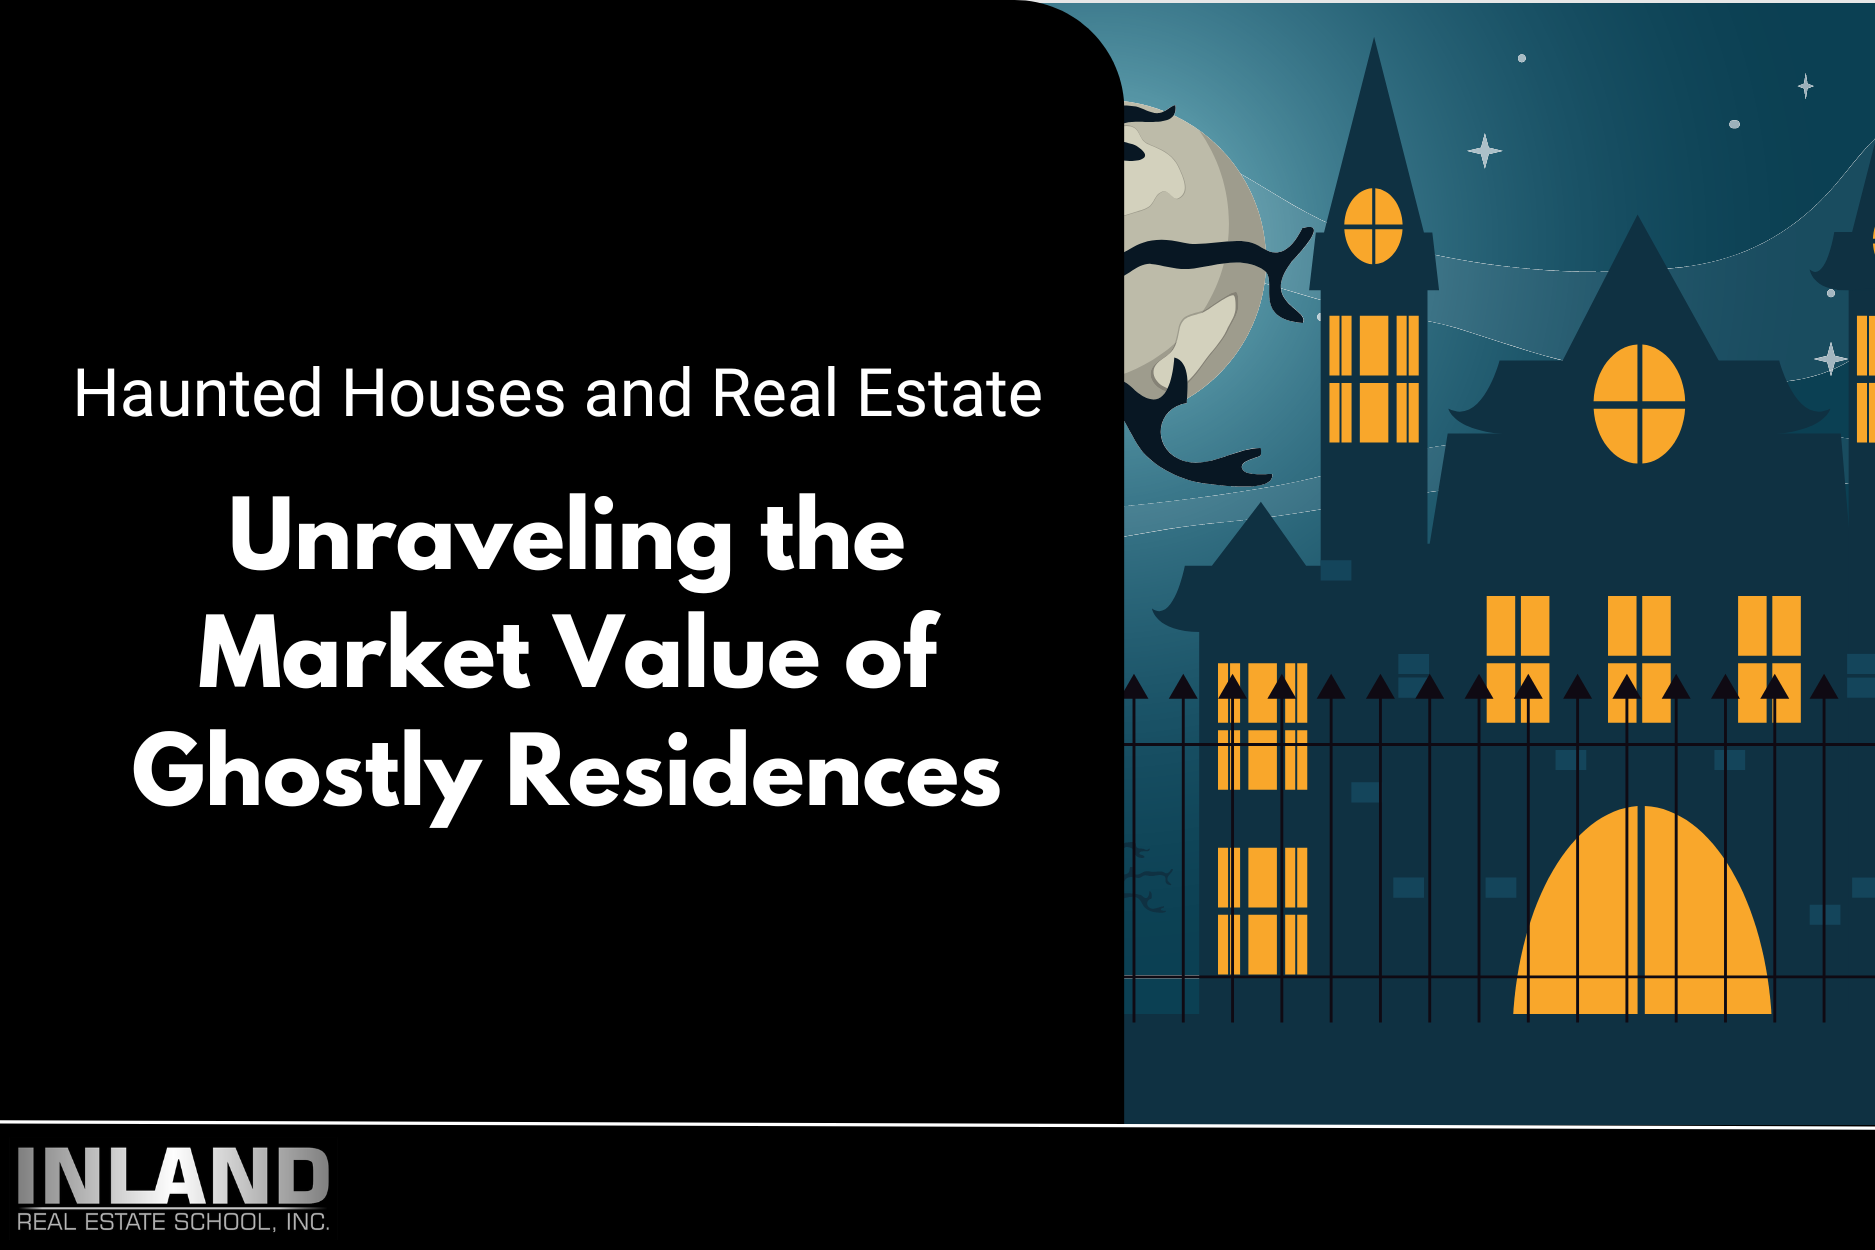 Haunted Houses and Real Estate: Unraveling the Market Value of Ghostly Residences